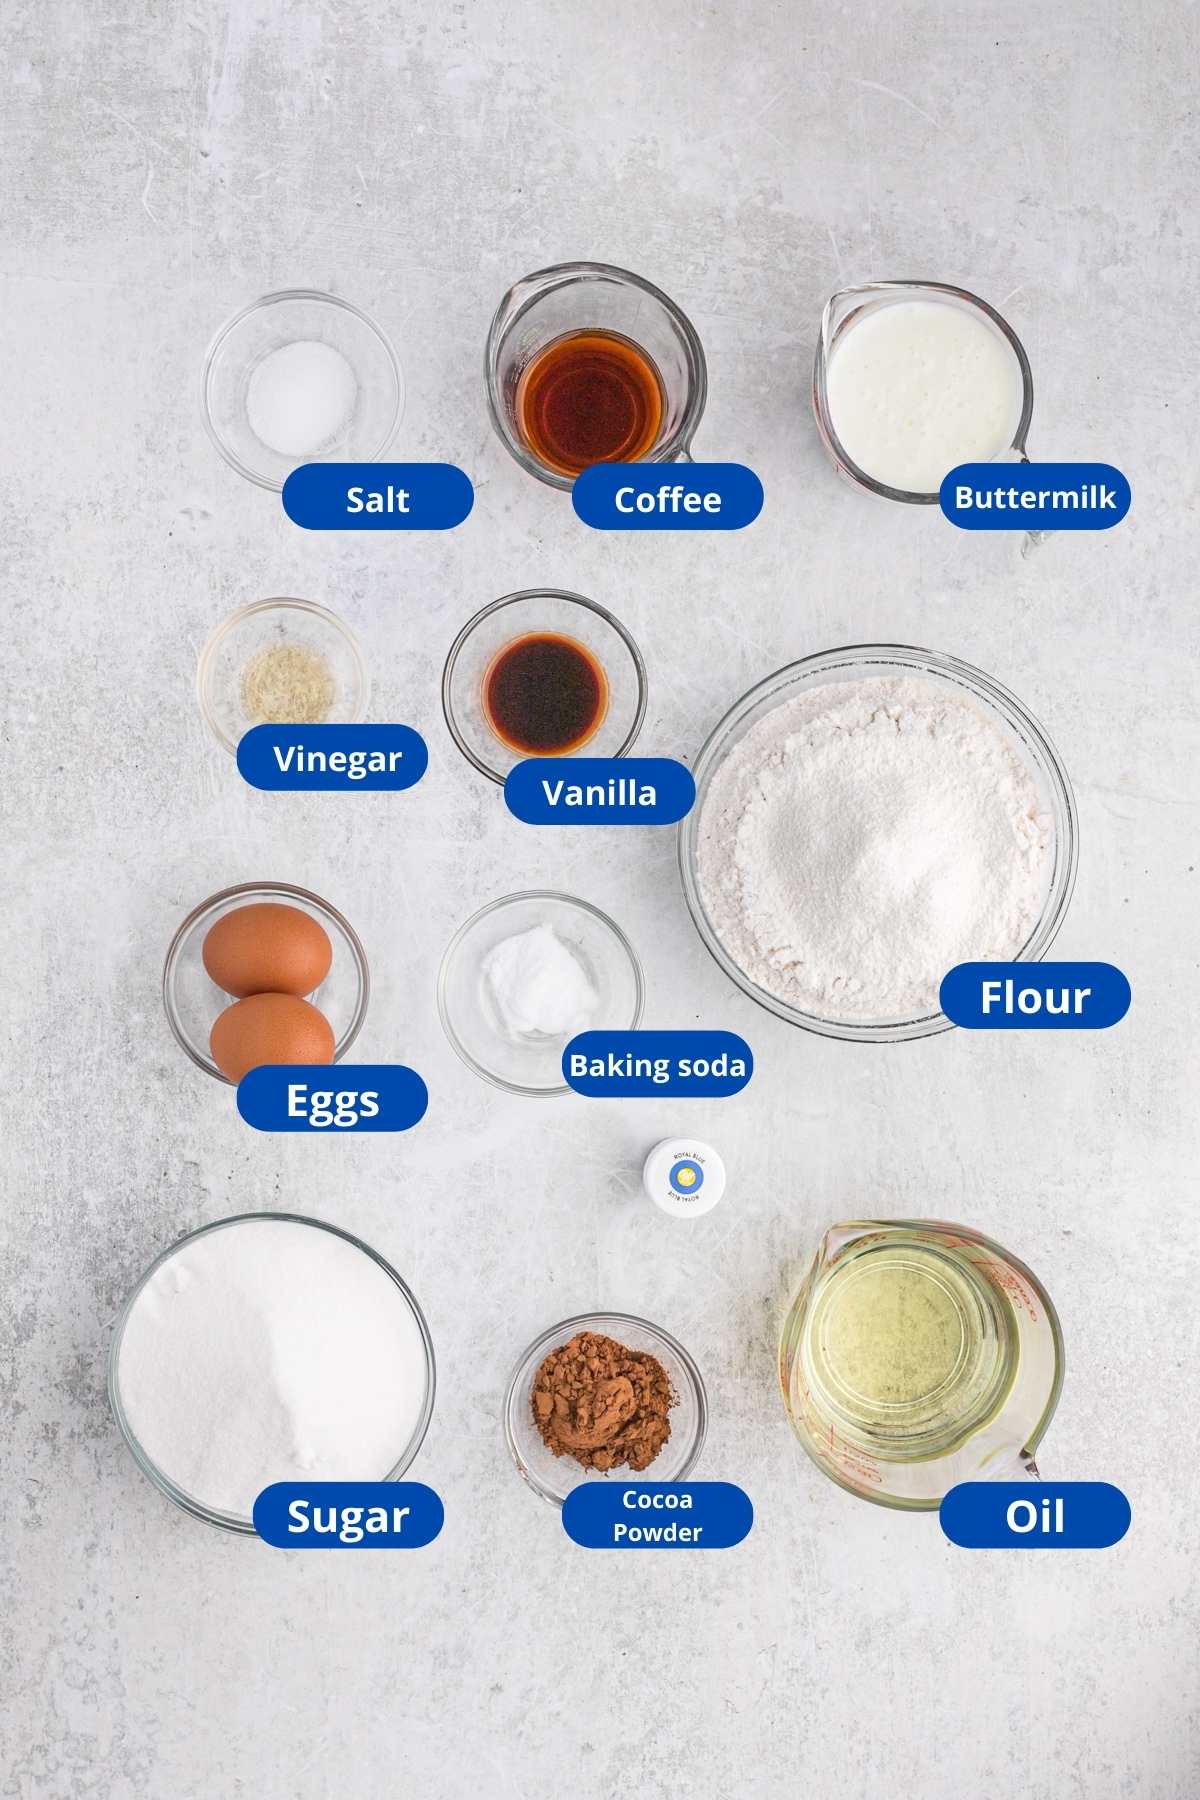 Ingredients for a cake batter in separate clear bowls